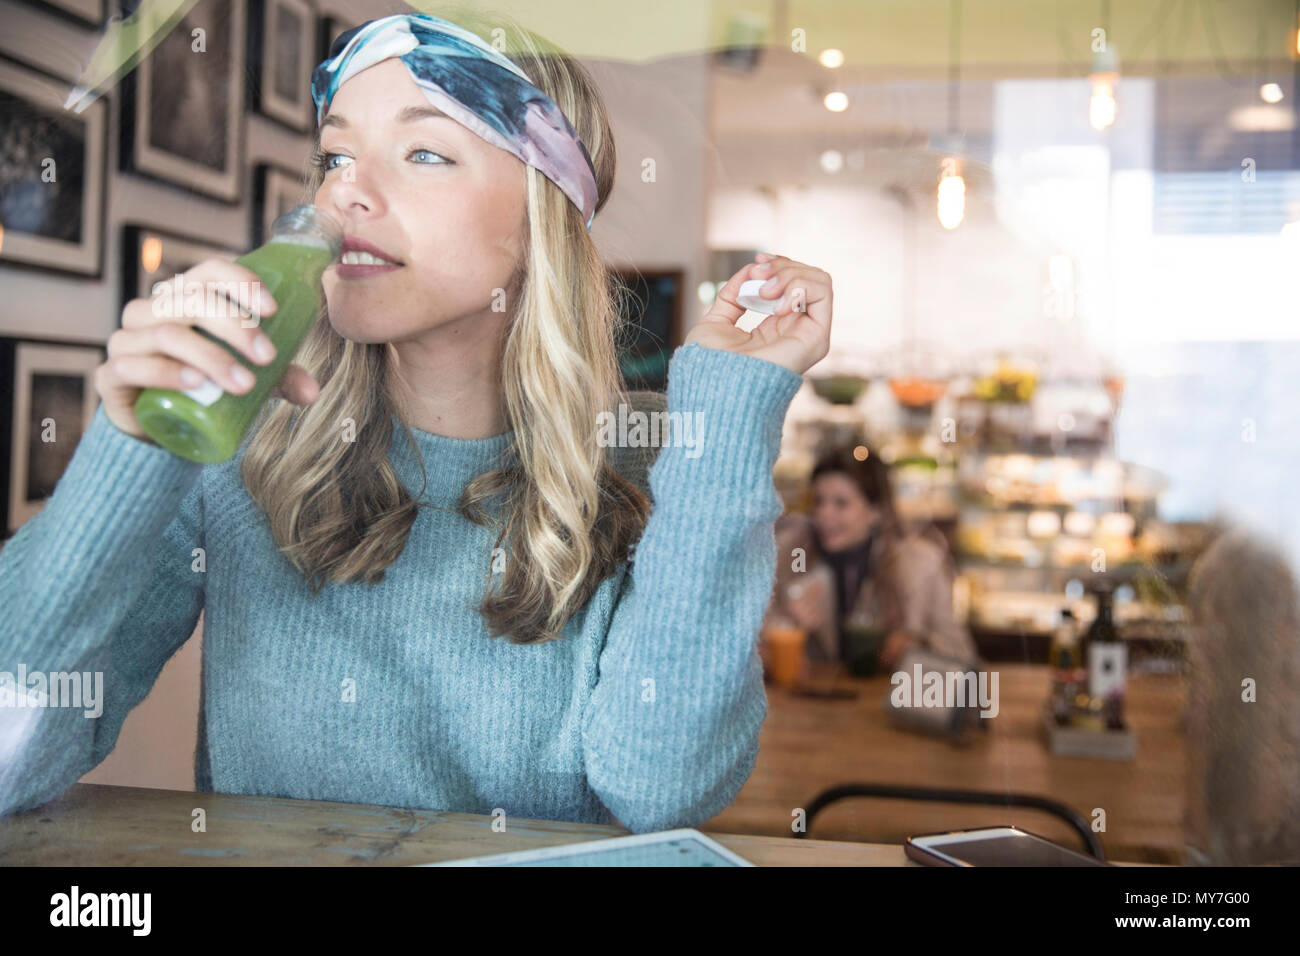 Young woman drinking vegetable juice at cafe window seat Stock Photo